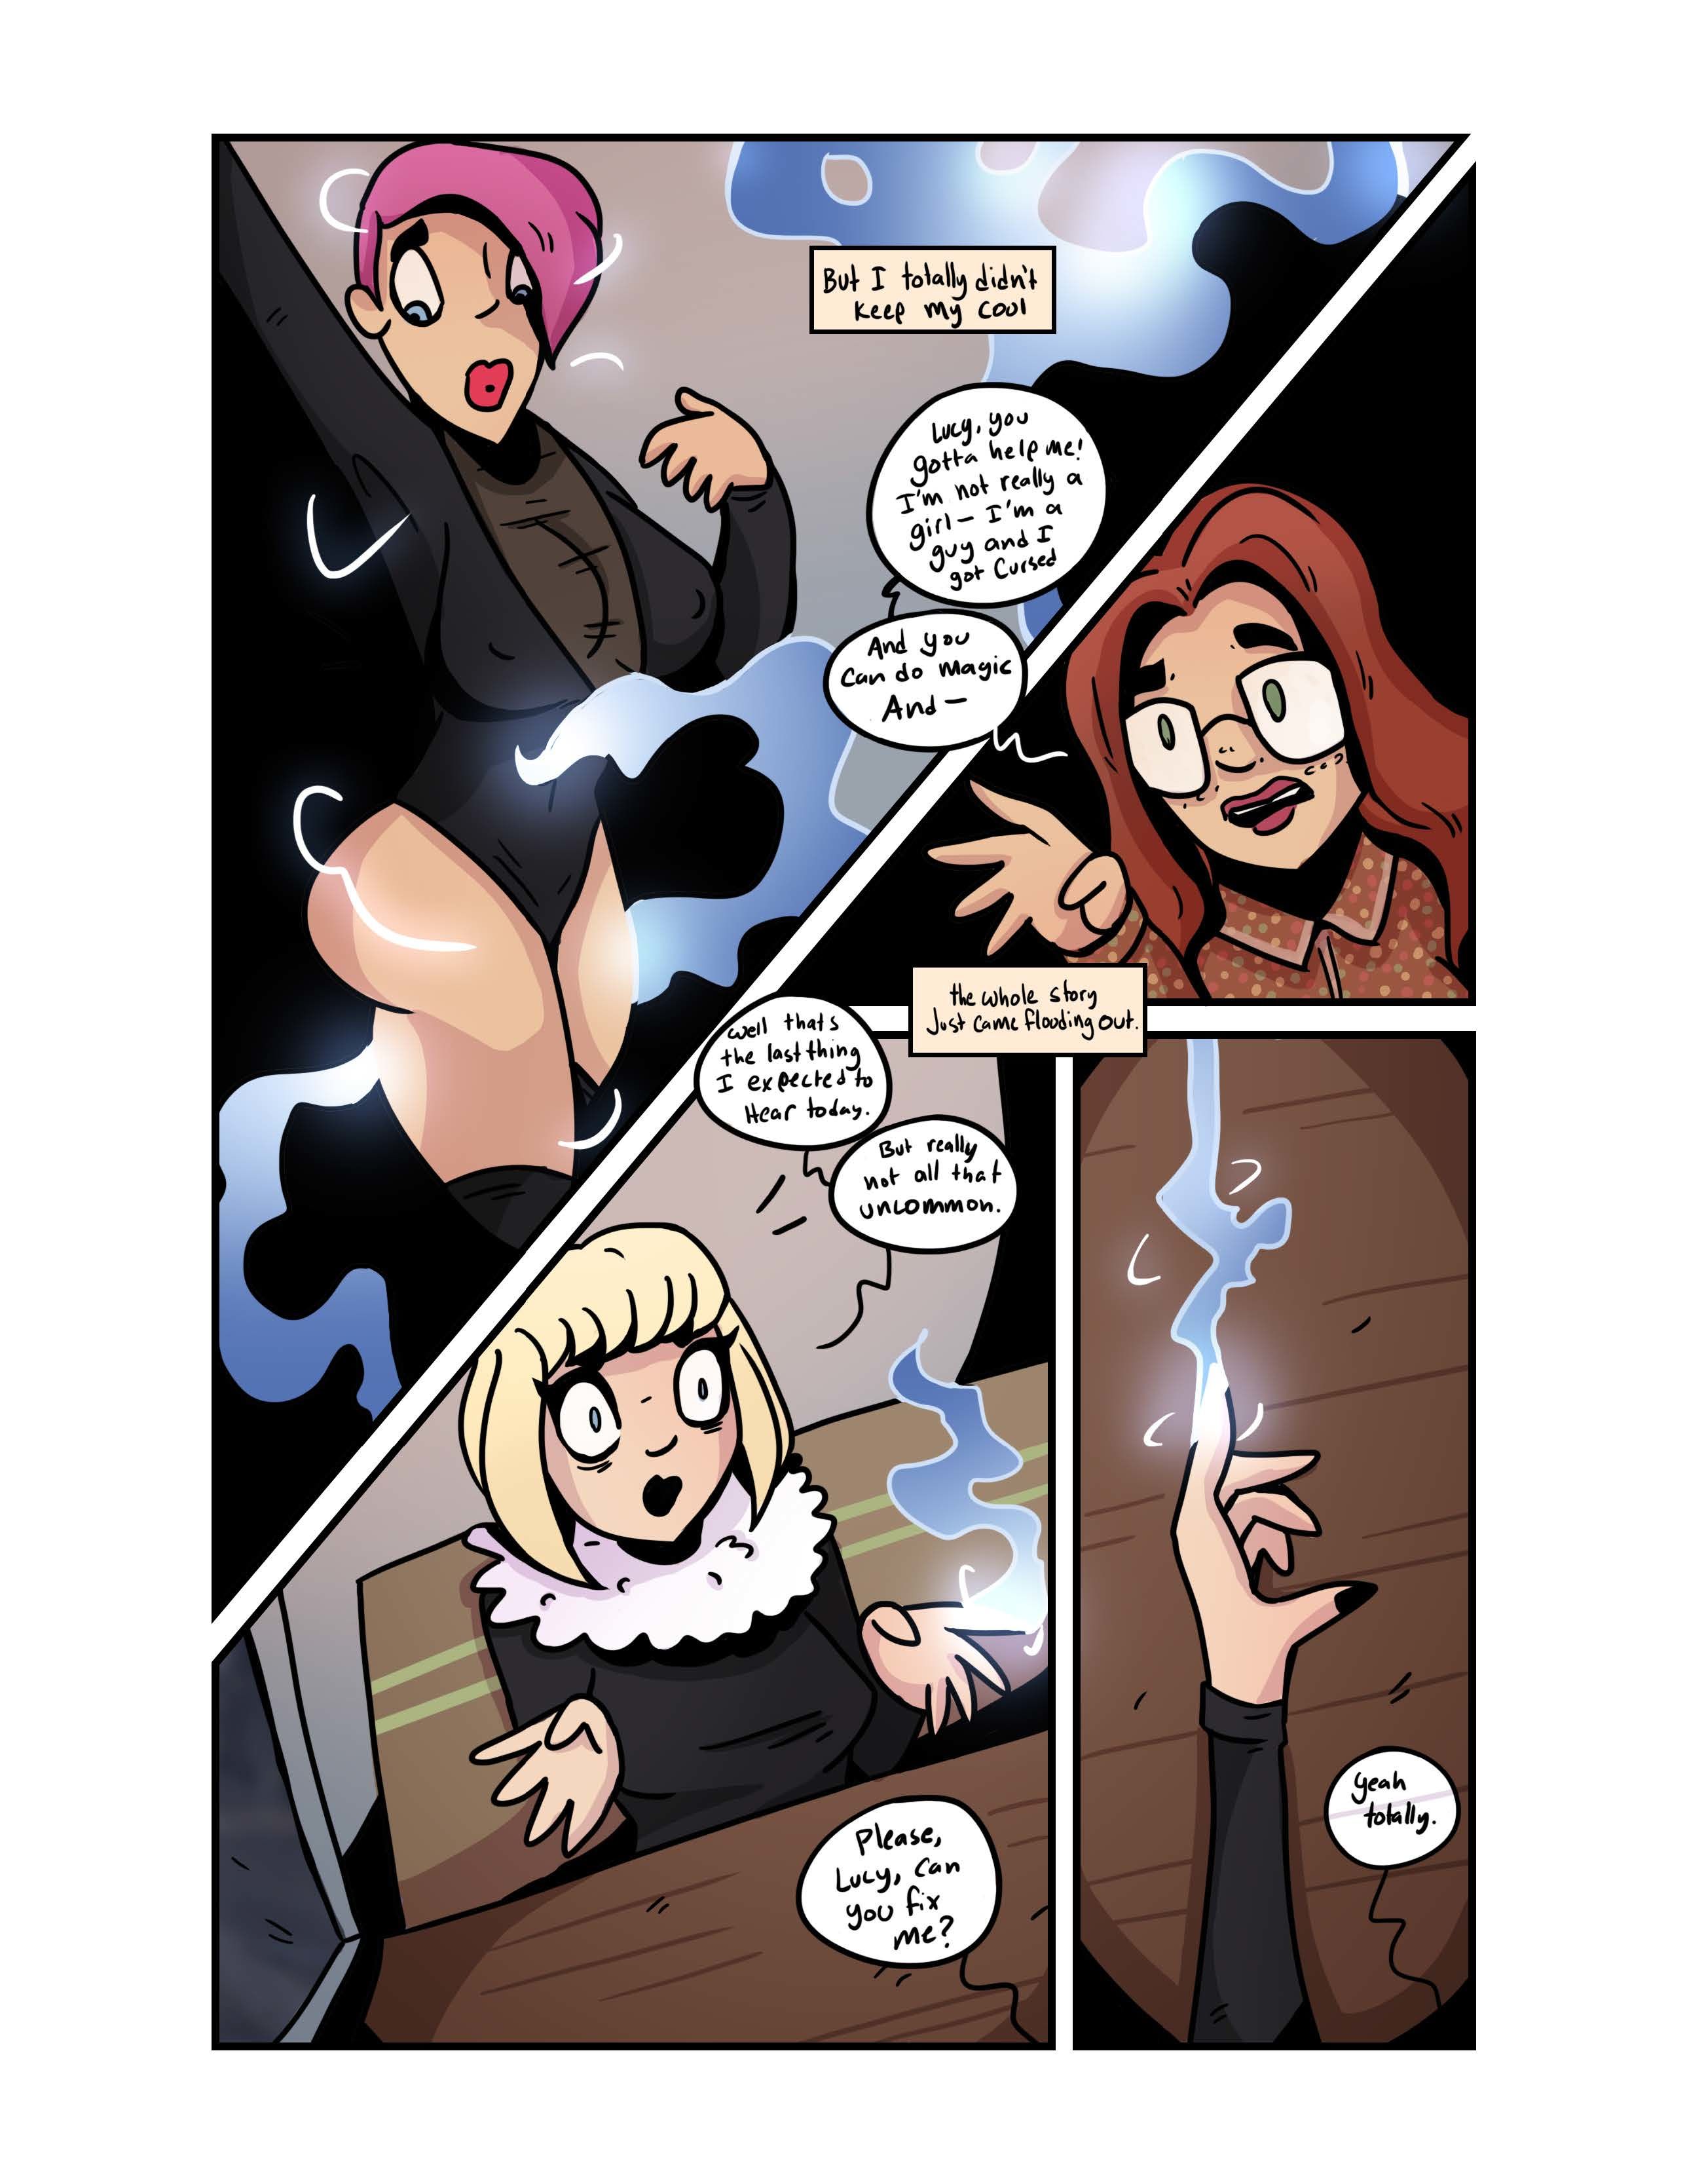 The New Girl Issue 1-5 by Grumpy TG page 32